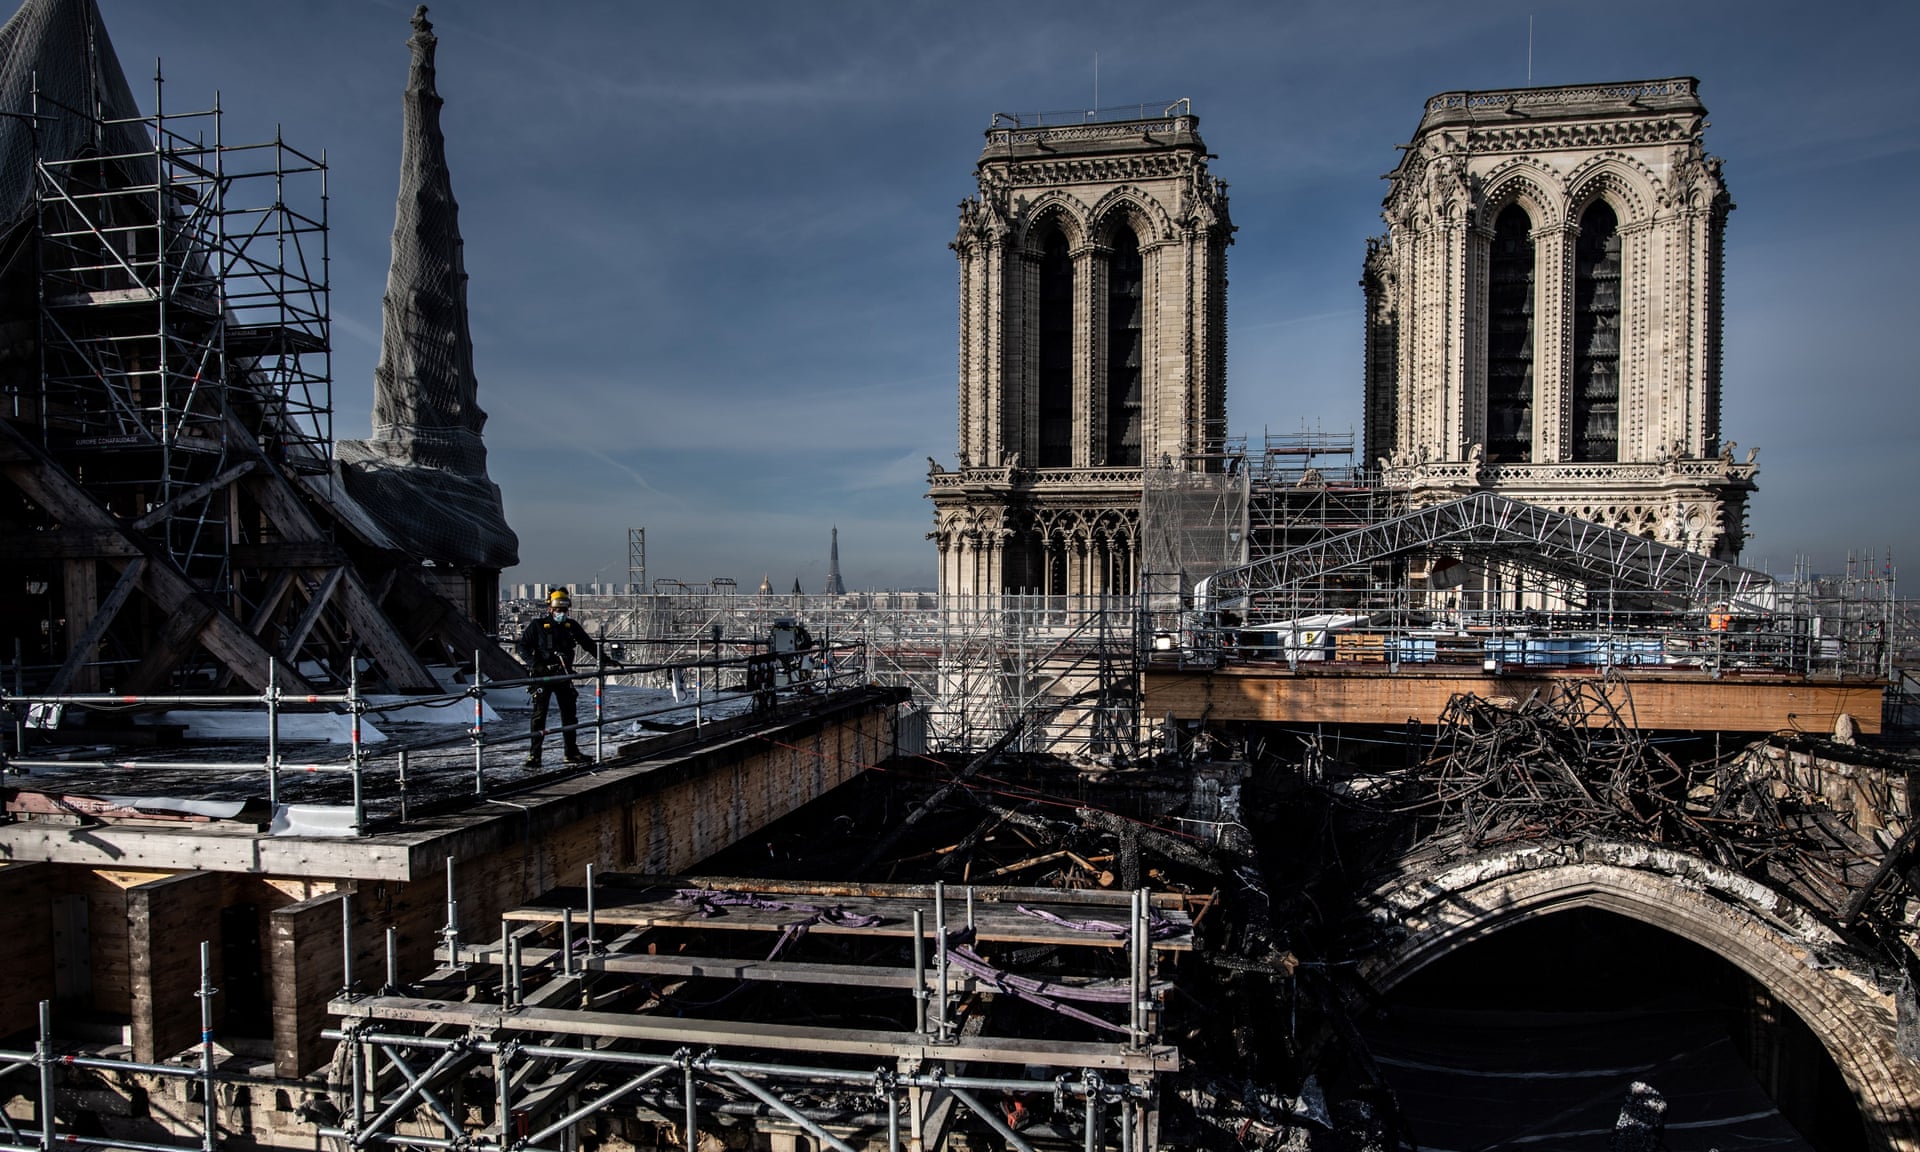 Workers on the roof of Notre Dame removing the burnt scaffolding that surrounded the spire